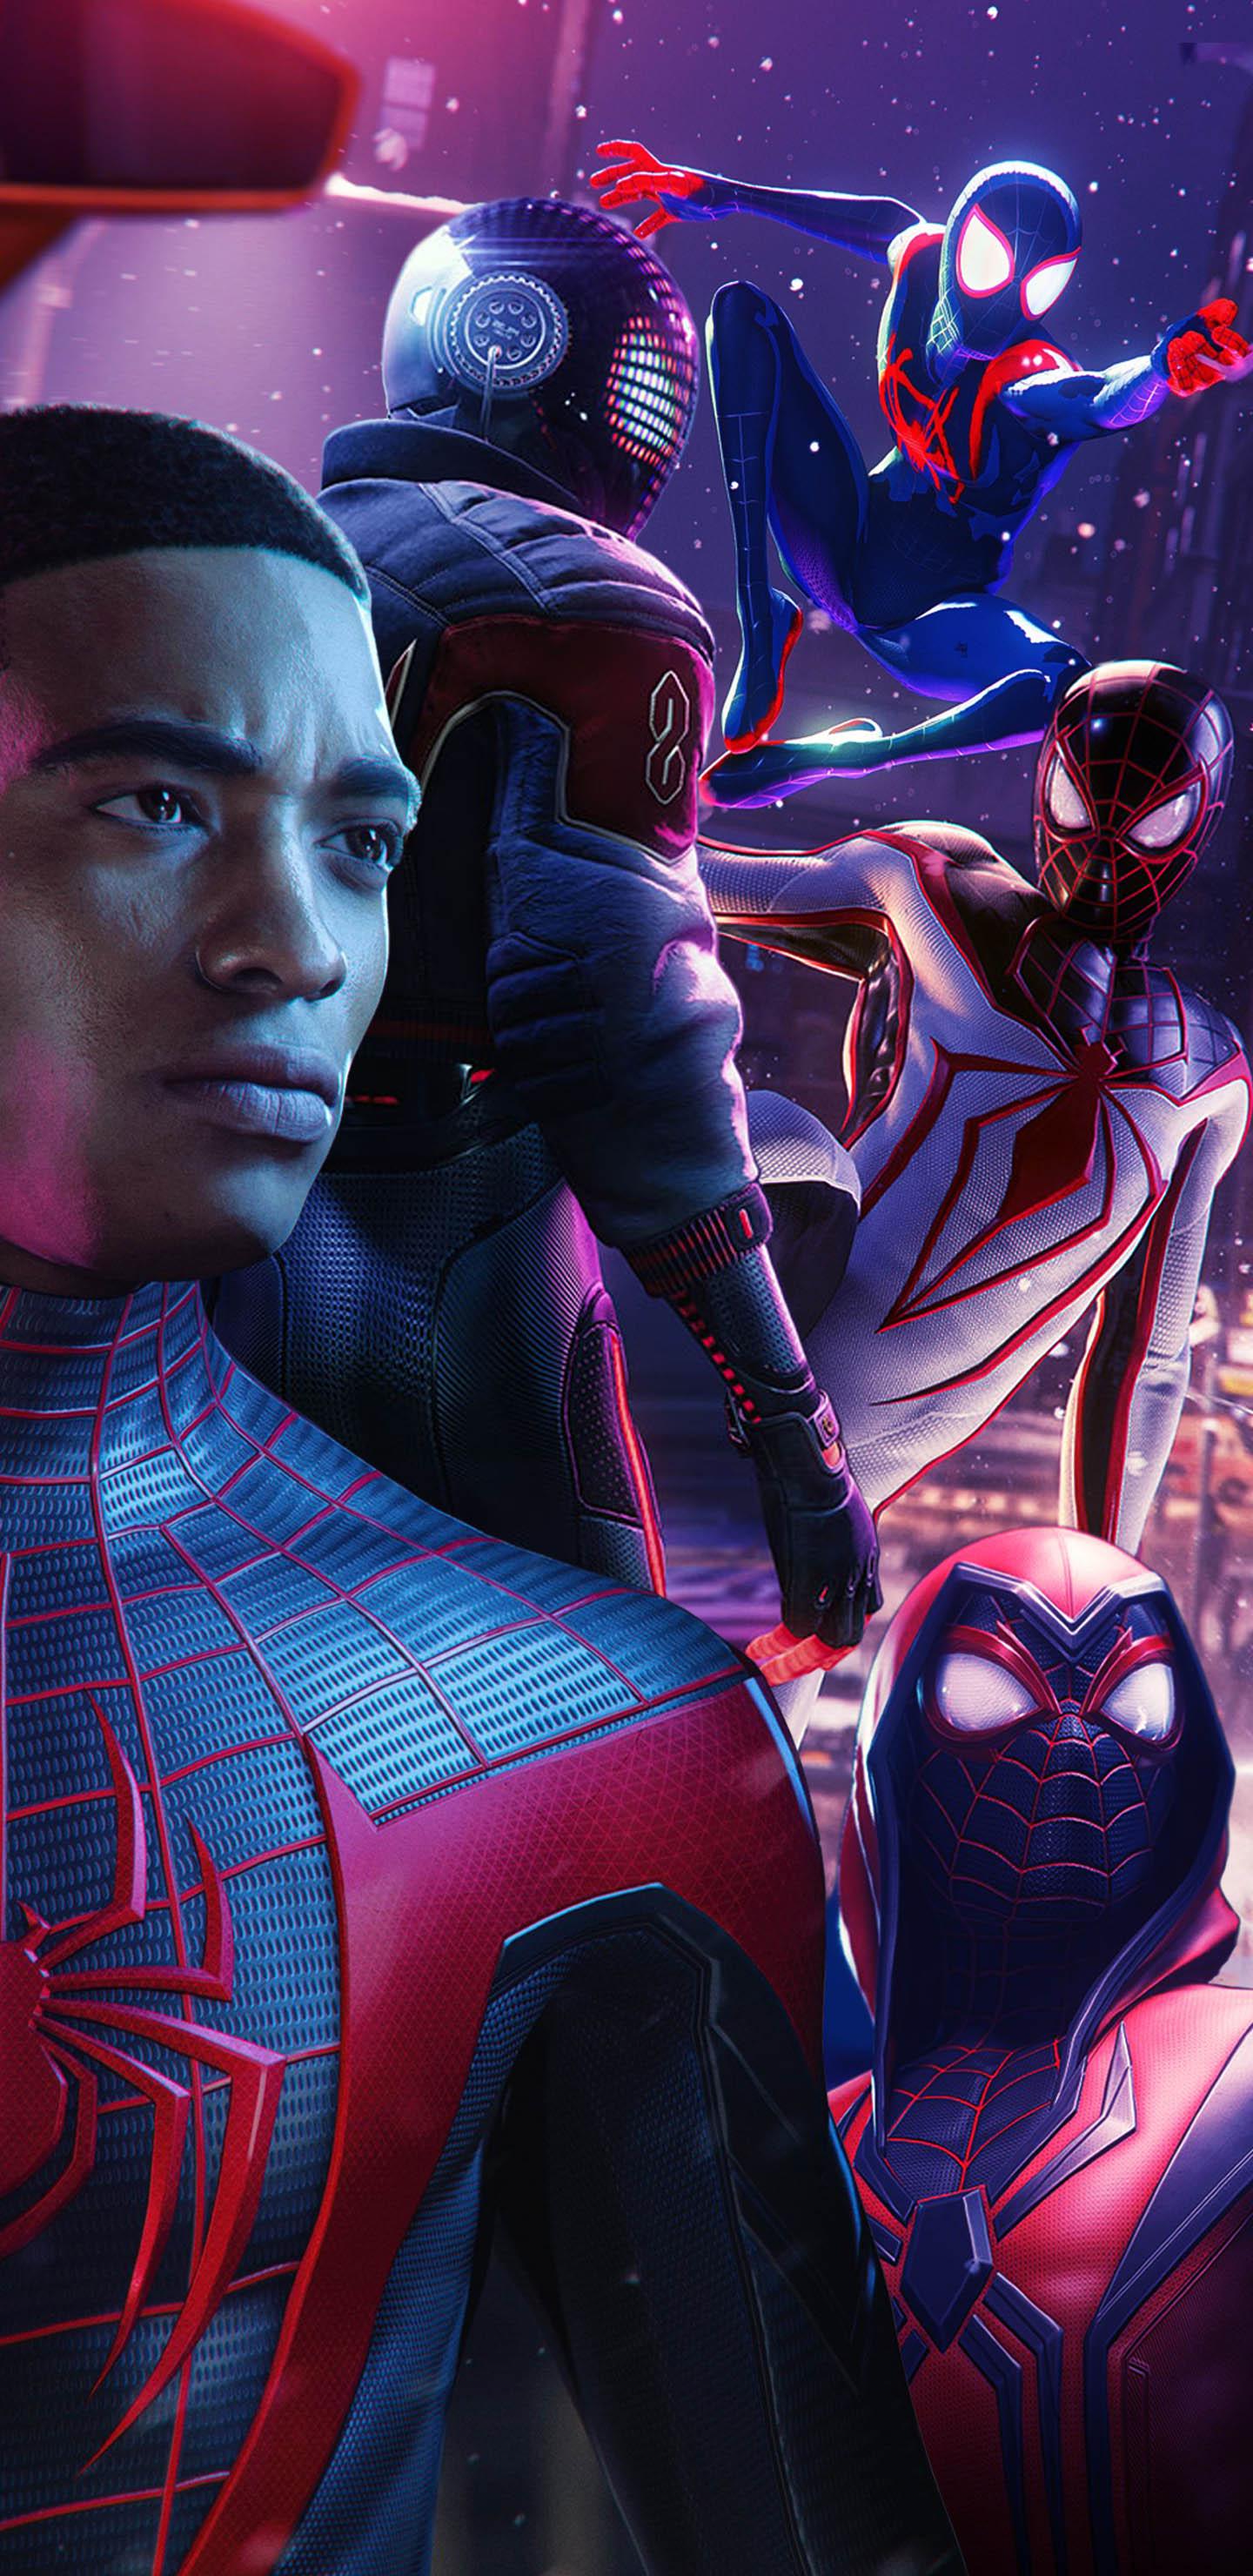 New Miles Morales PS5 phone wallpaper for screens with a 1440 x 2960 screen resolution. Check out my page for more sizes